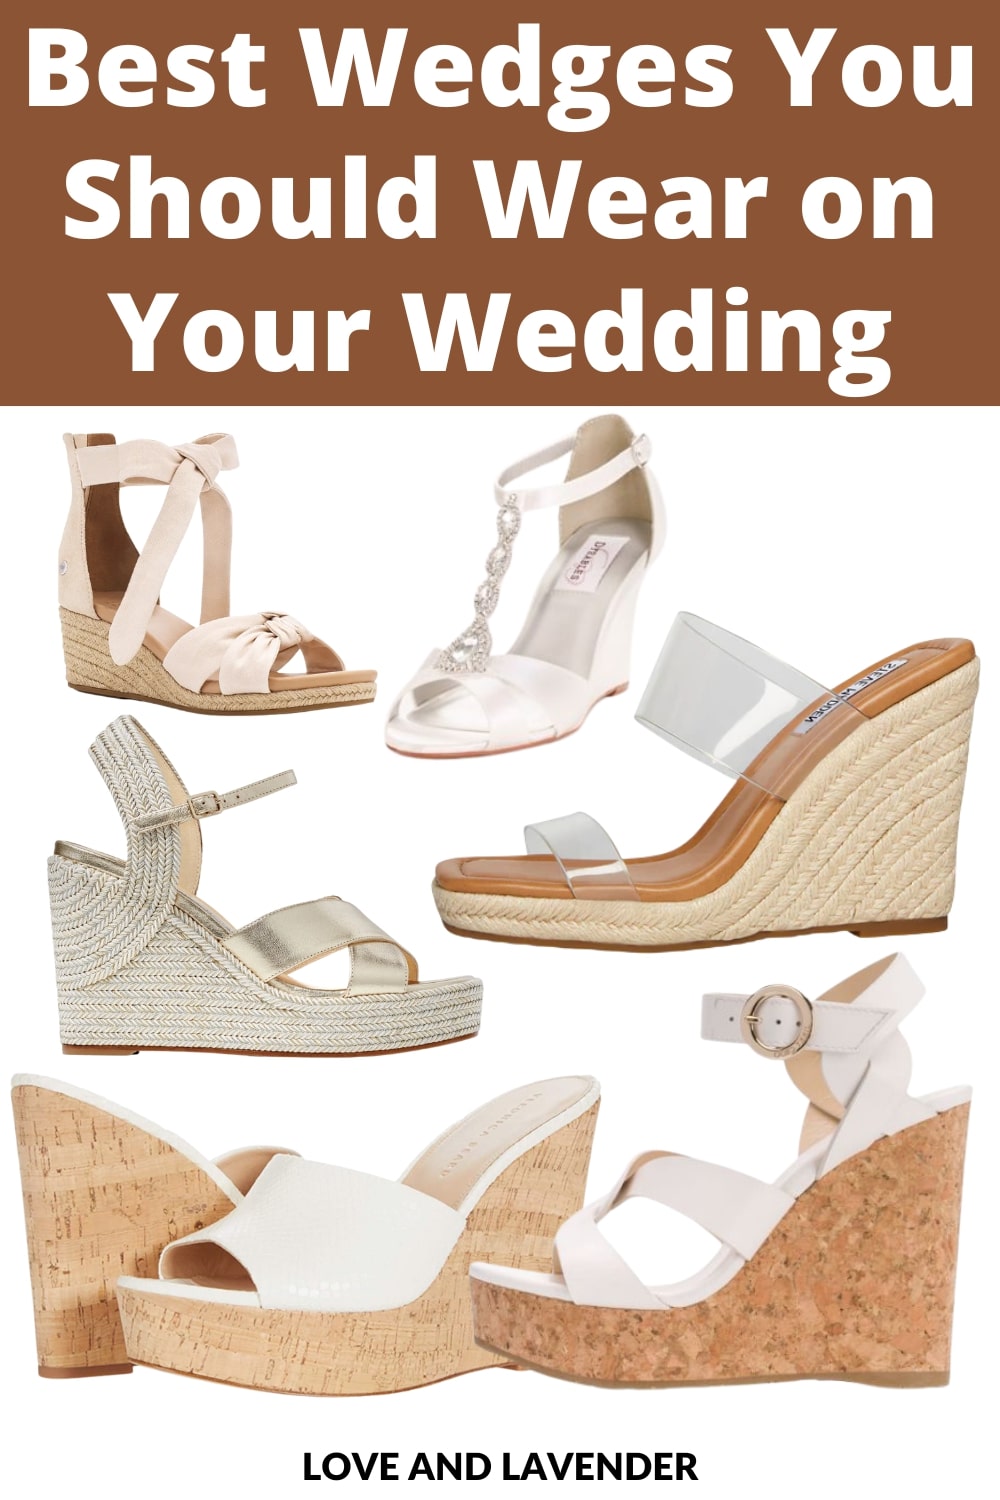 Wedding Wedges for a Bride